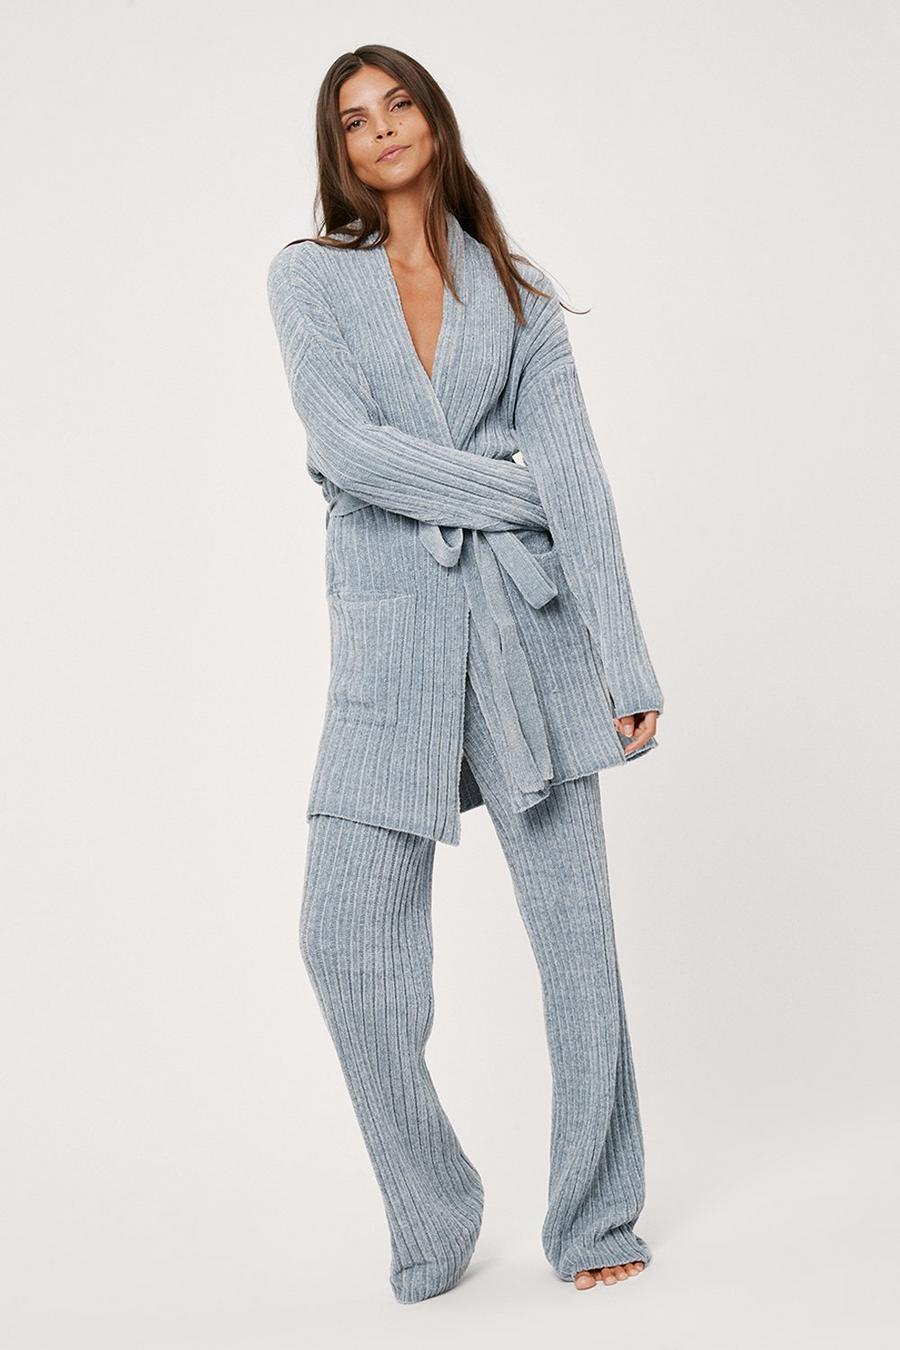 Ribbed Chenille Belted Robe and Pants Loungewear Set